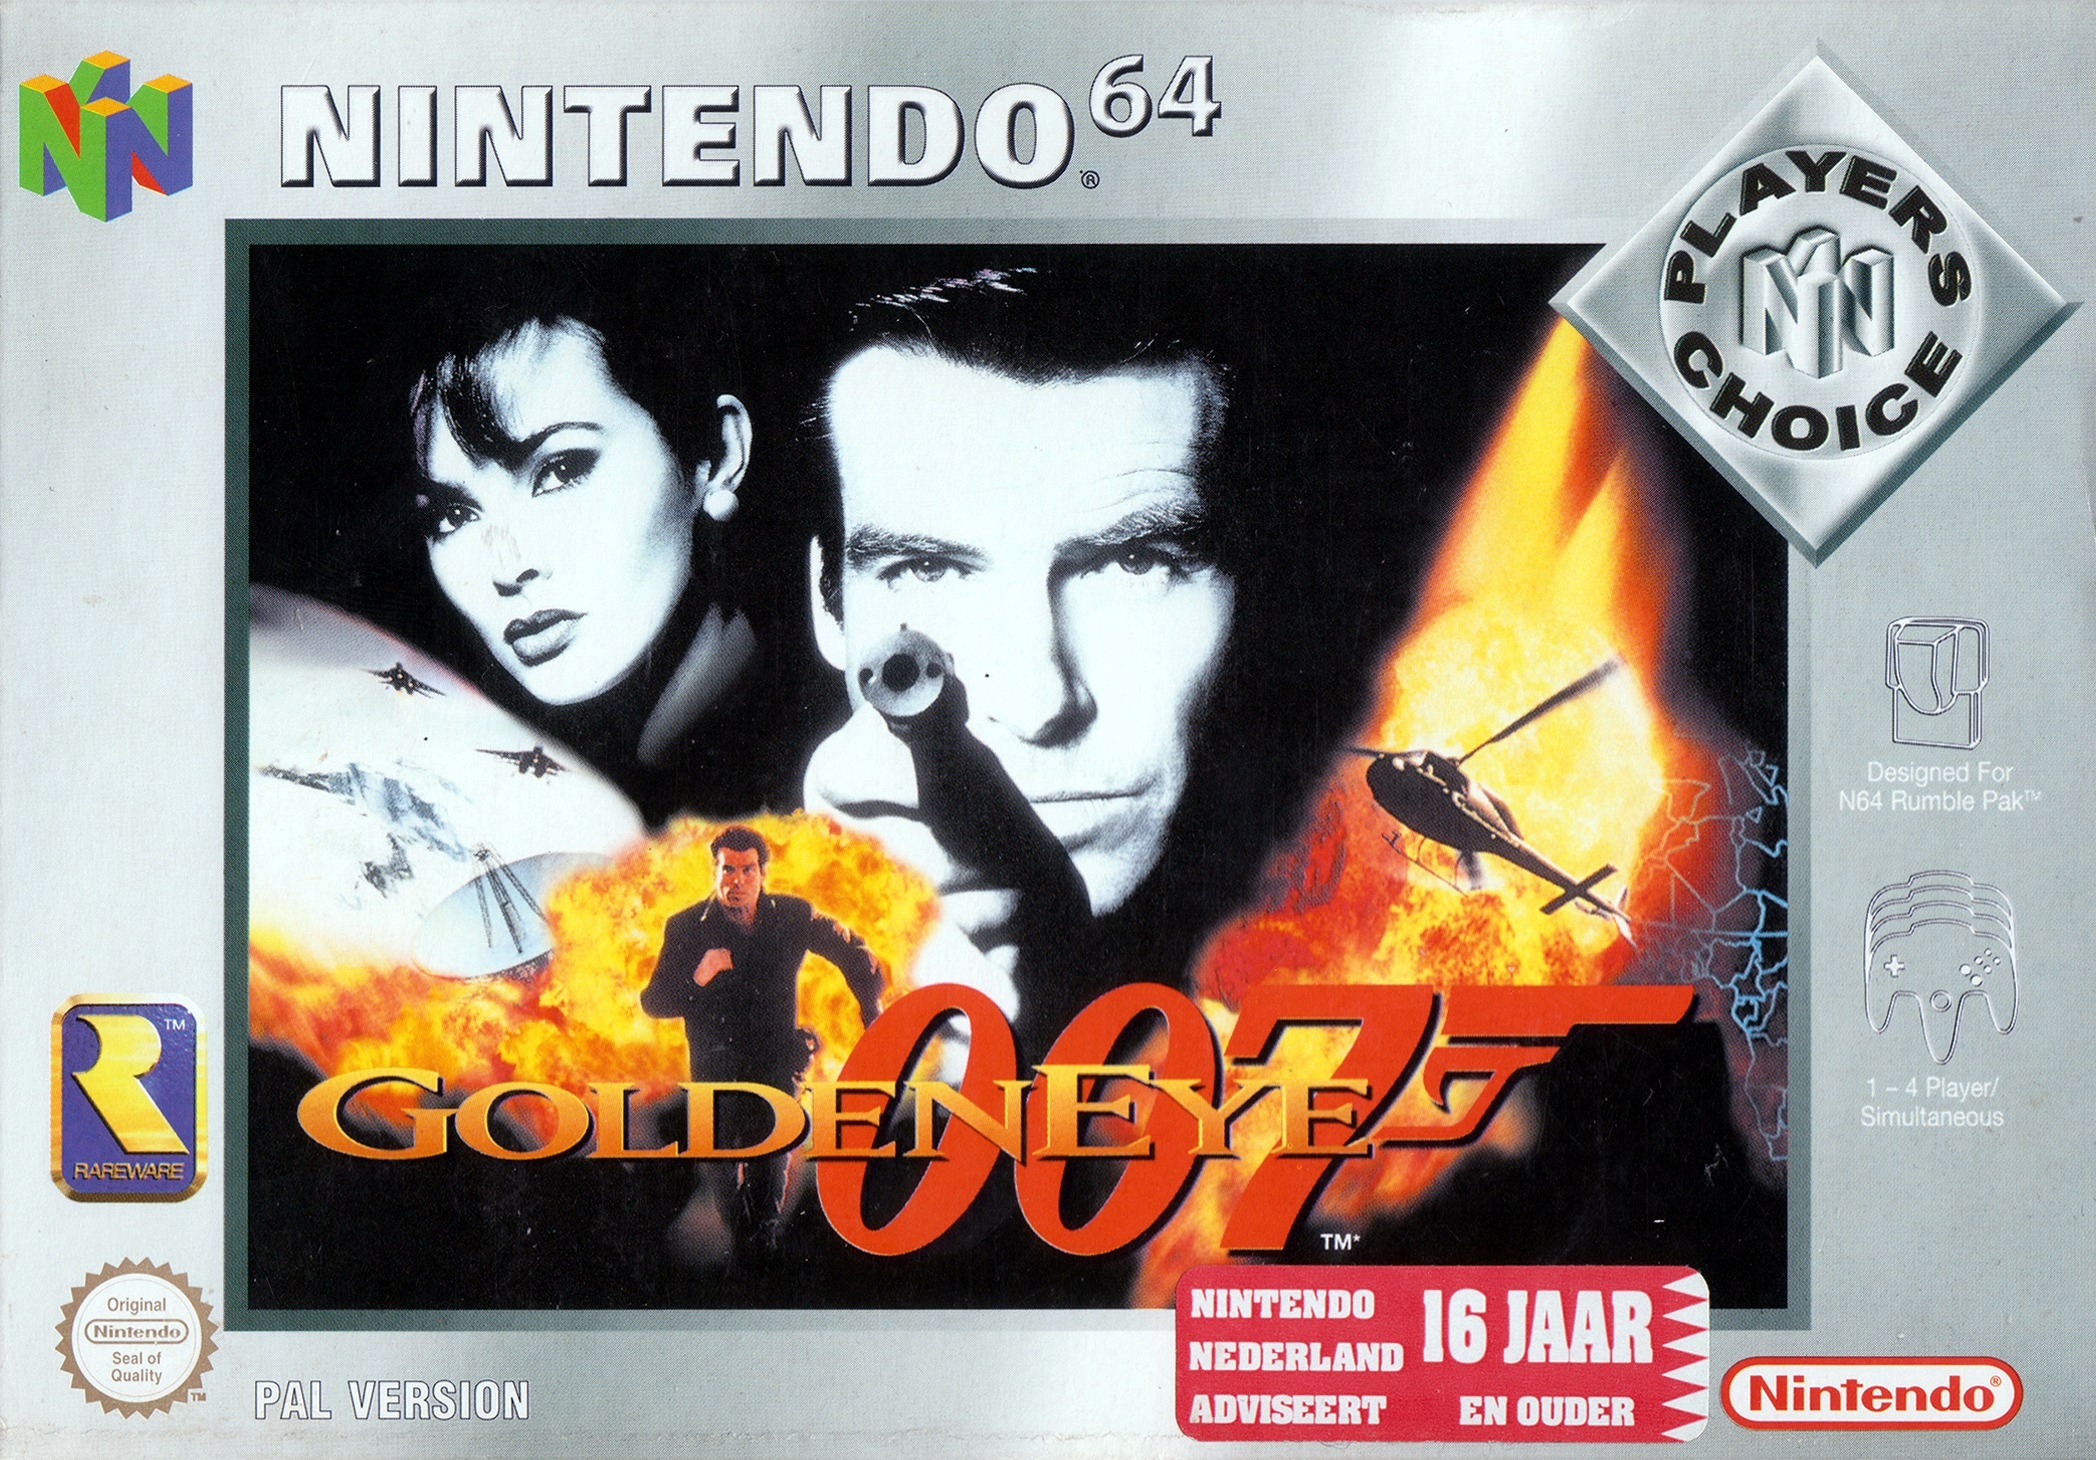 GoldenEye 007 with Mario Characters Details - LaunchBox Games Database